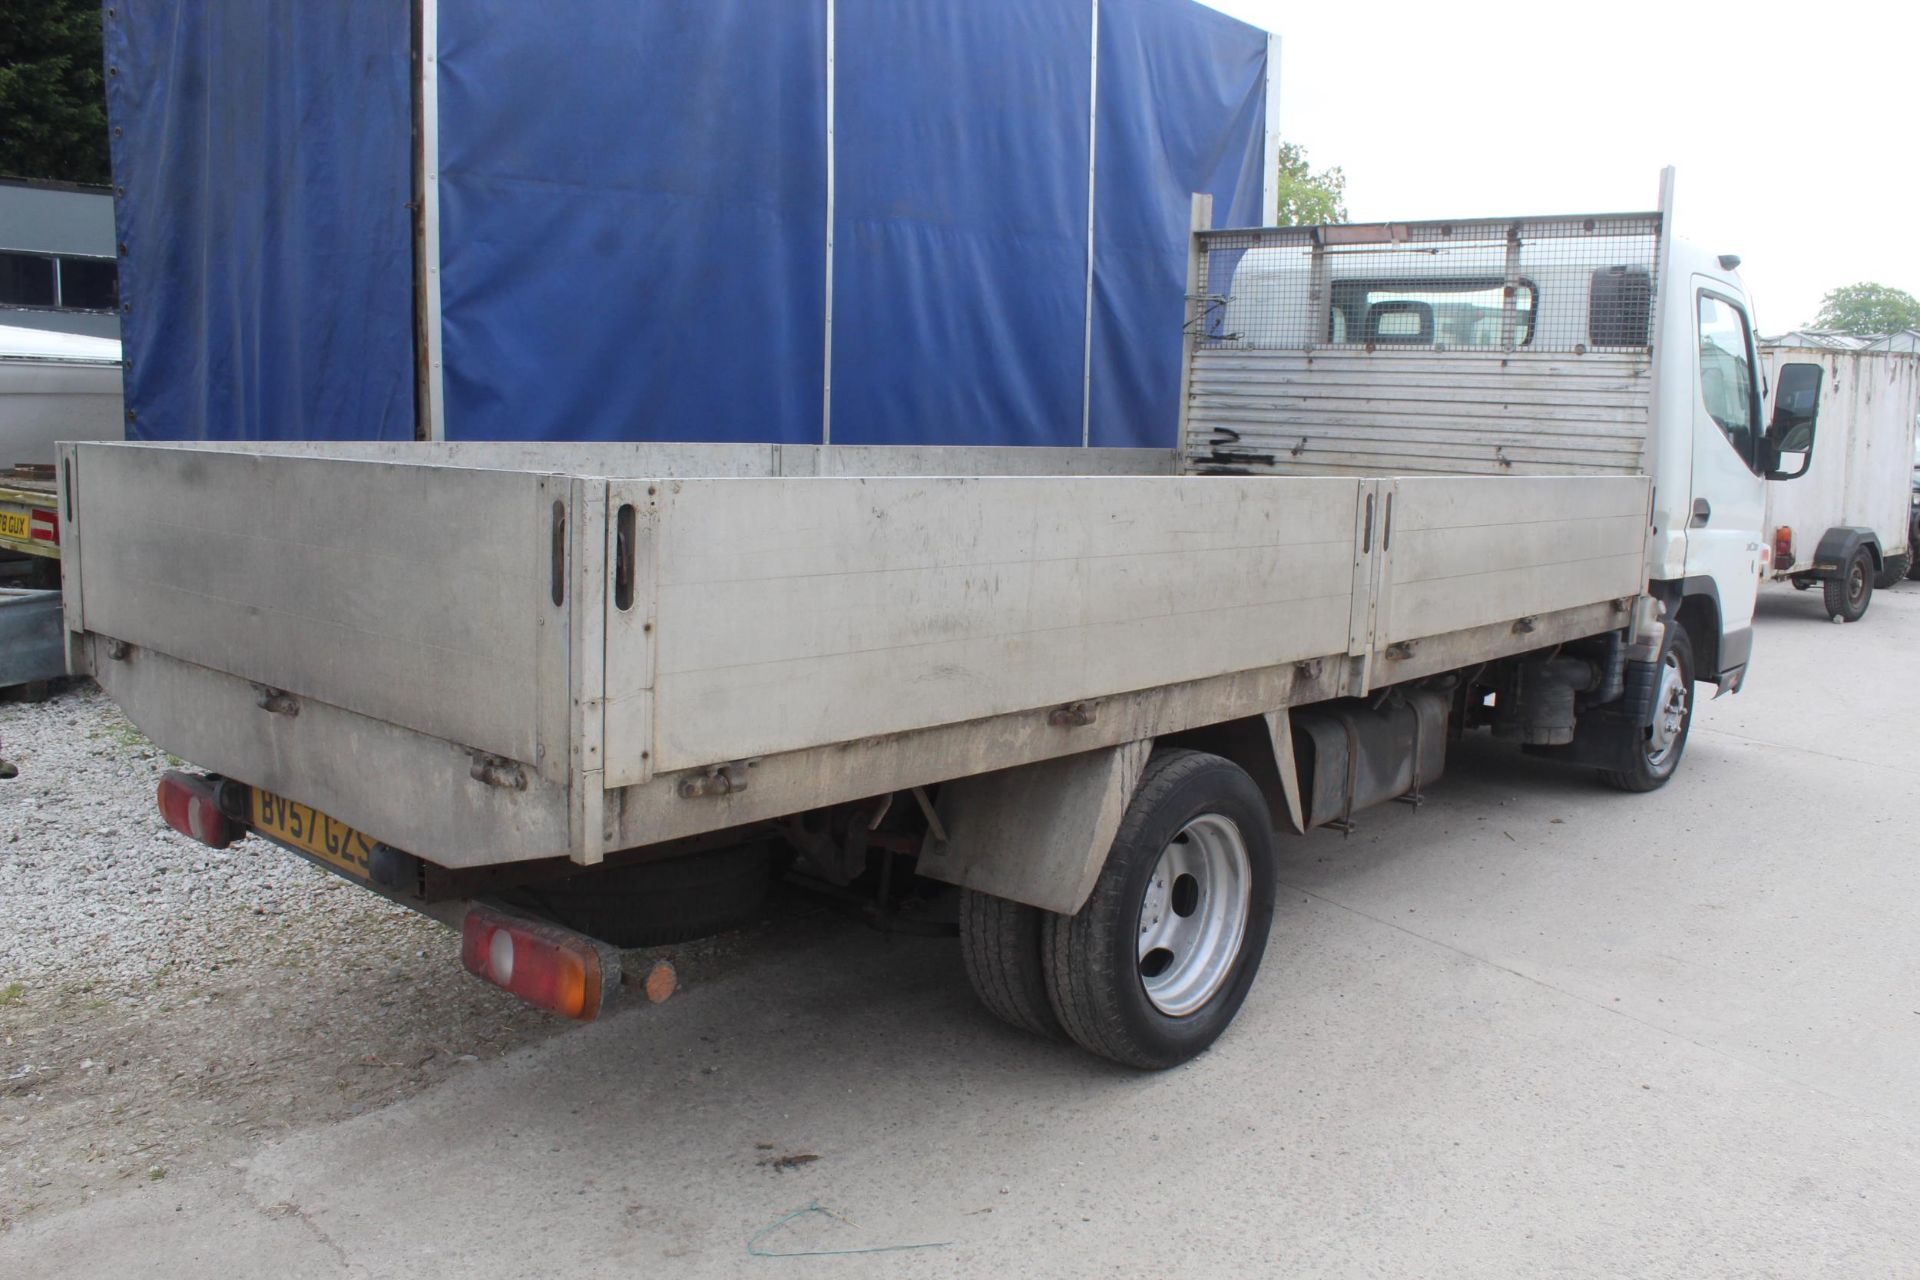 MITSUBISHI FUSO 3.5TON DROP SIDE LORRY BV57GZS 2007 FULL V5 130000 MILES NO VAT WHILST ALL - Image 2 of 3